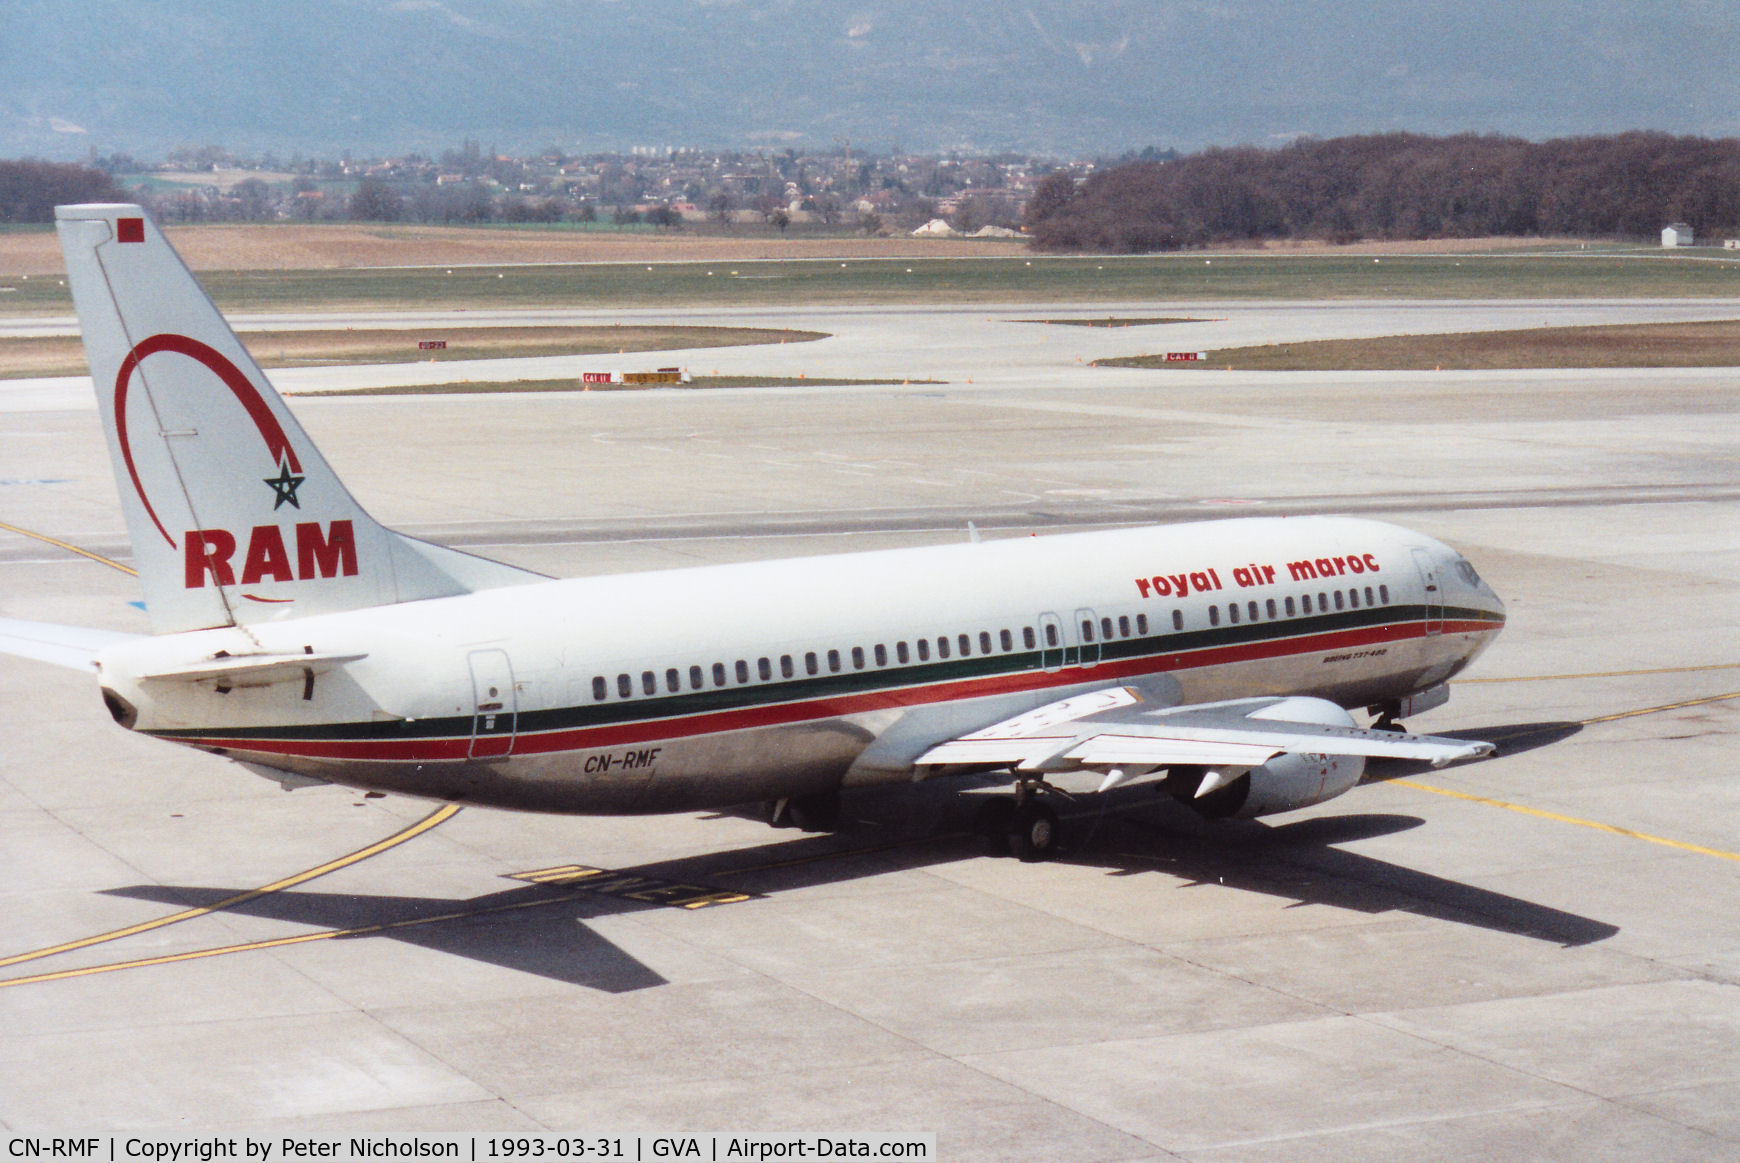 CN-RMF, 1990 Boeing 737-4B6 C/N 24807-1880, Boeing 737-4B6 of Royal Air Maroc heading for the active runway at Geneva in March 1993.